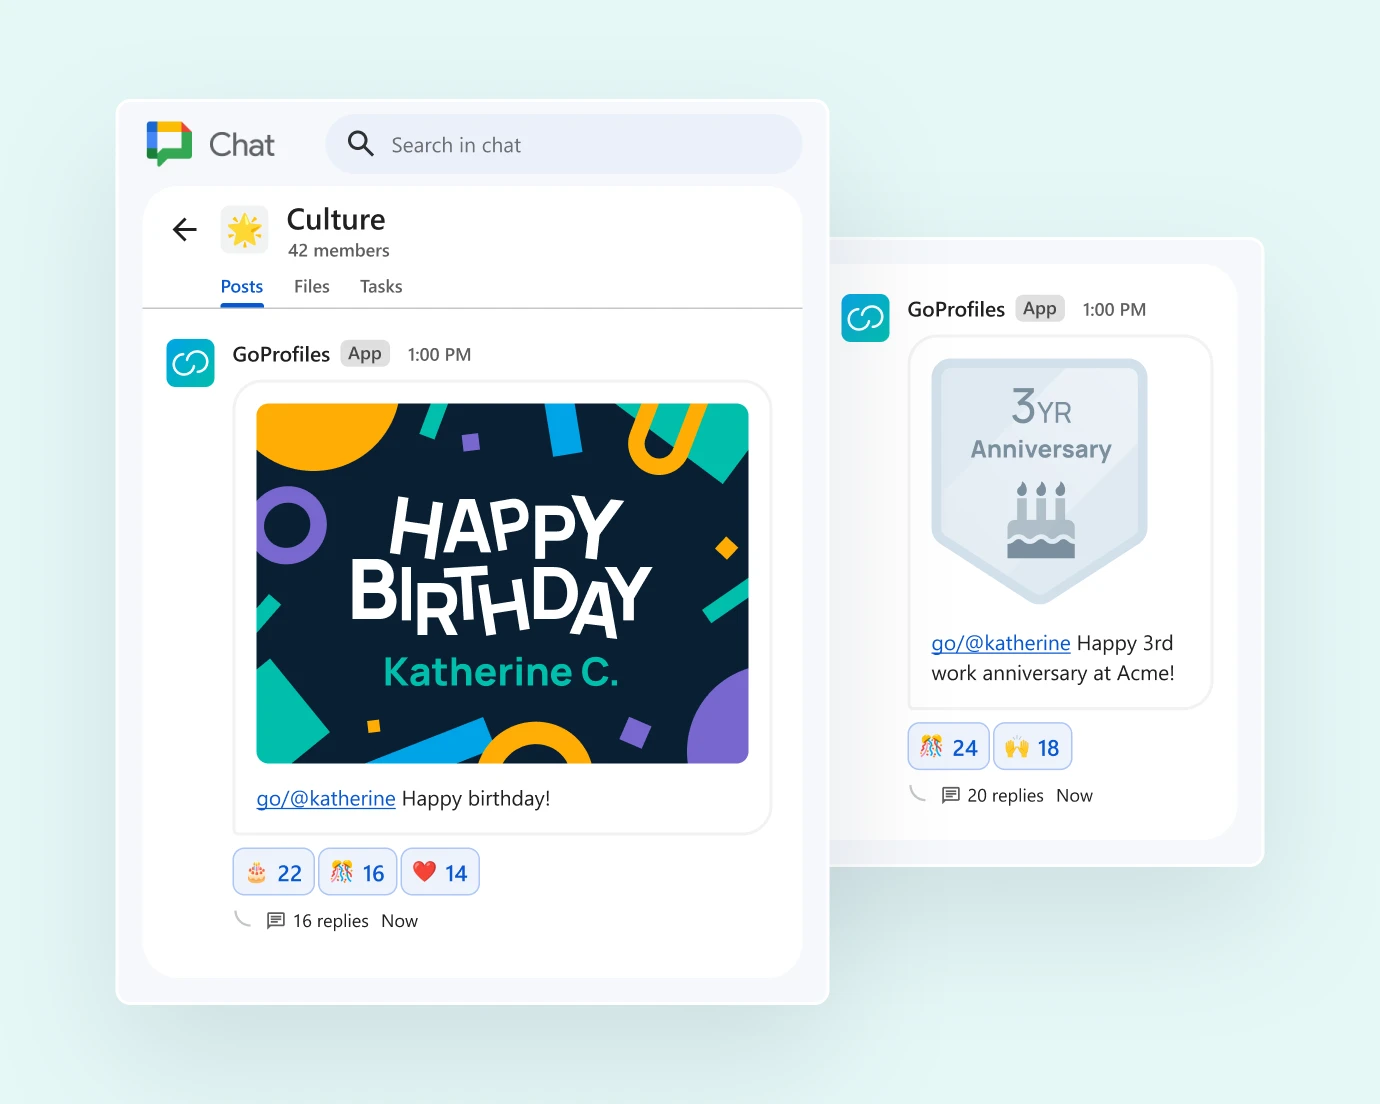 GoProfiles work anniversary and birthday messages on  